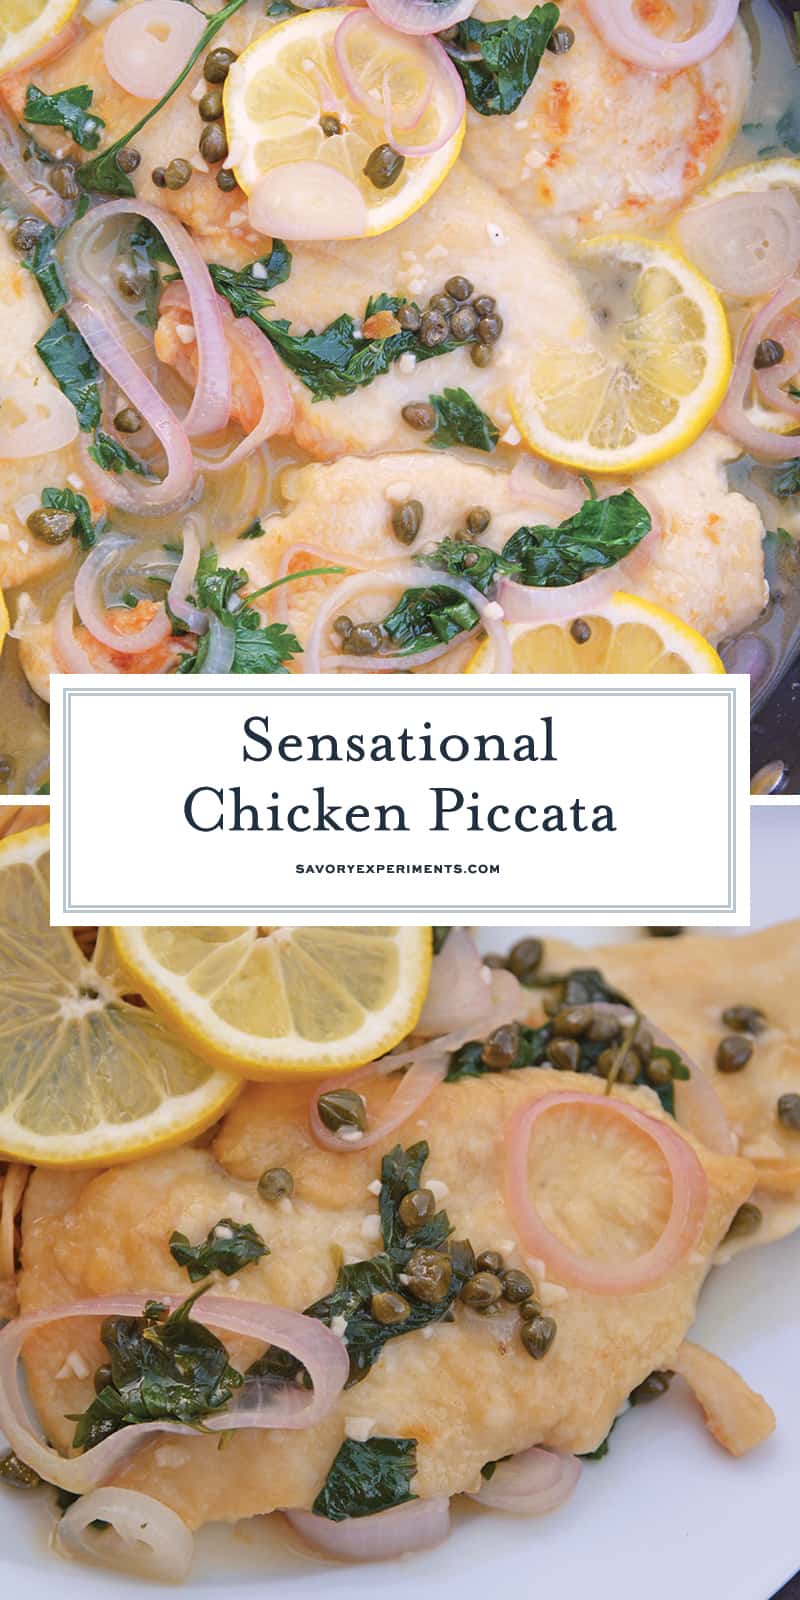 Classic Chicken Piccata is an easy Italian recipe that comes together in less than 3o minutes and explodes with flavors of lemon, caper and shallot. Delicious!  #chickenpiccata #easyitalianrecipes www.savoryexperiments.com 